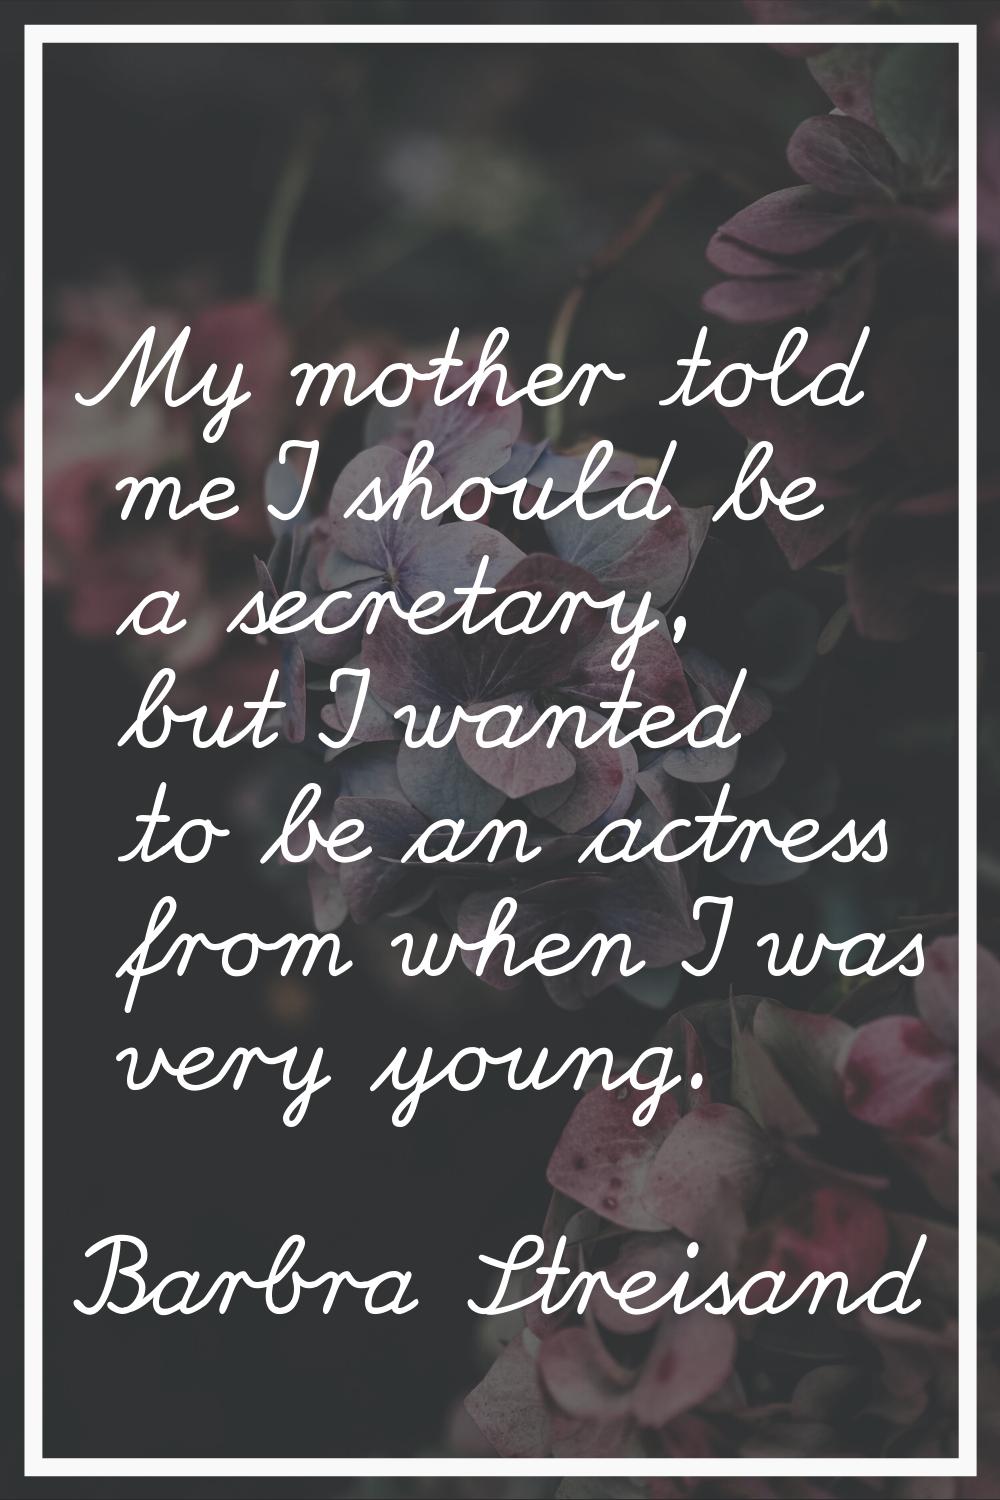 My mother told me I should be a secretary, but I wanted to be an actress from when I was very young